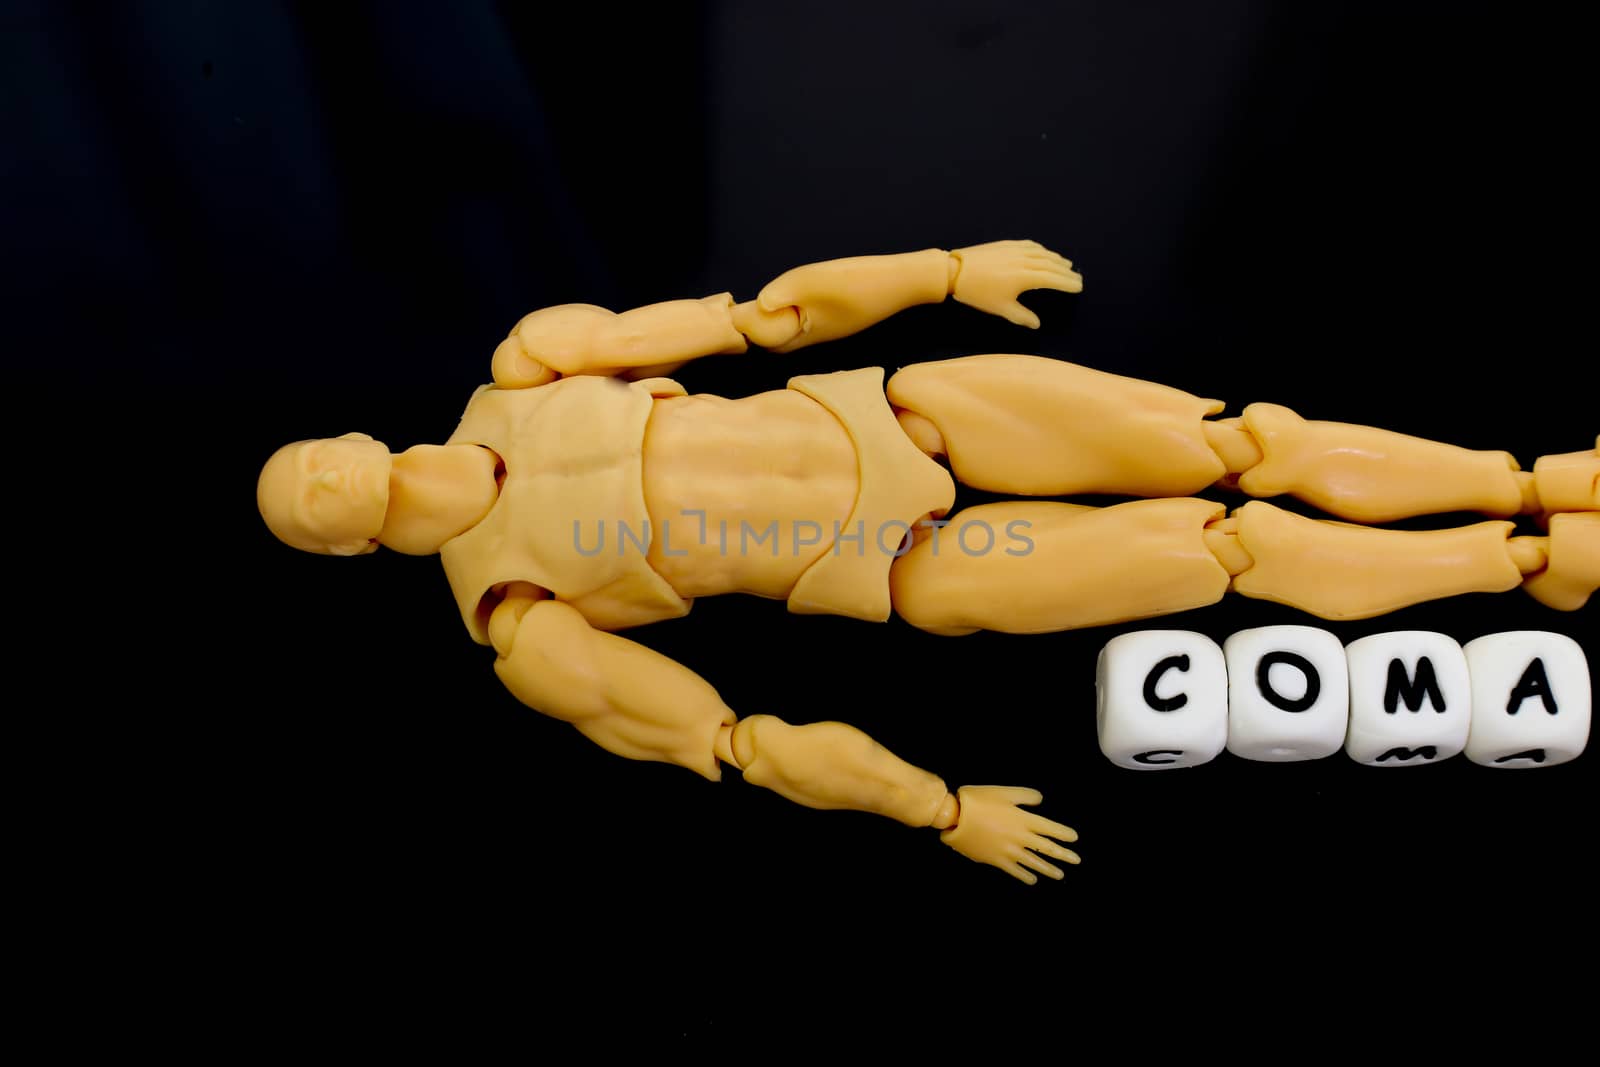 coma, a condition that needs urgent medical treatment is depicted as a model man lying on the floor